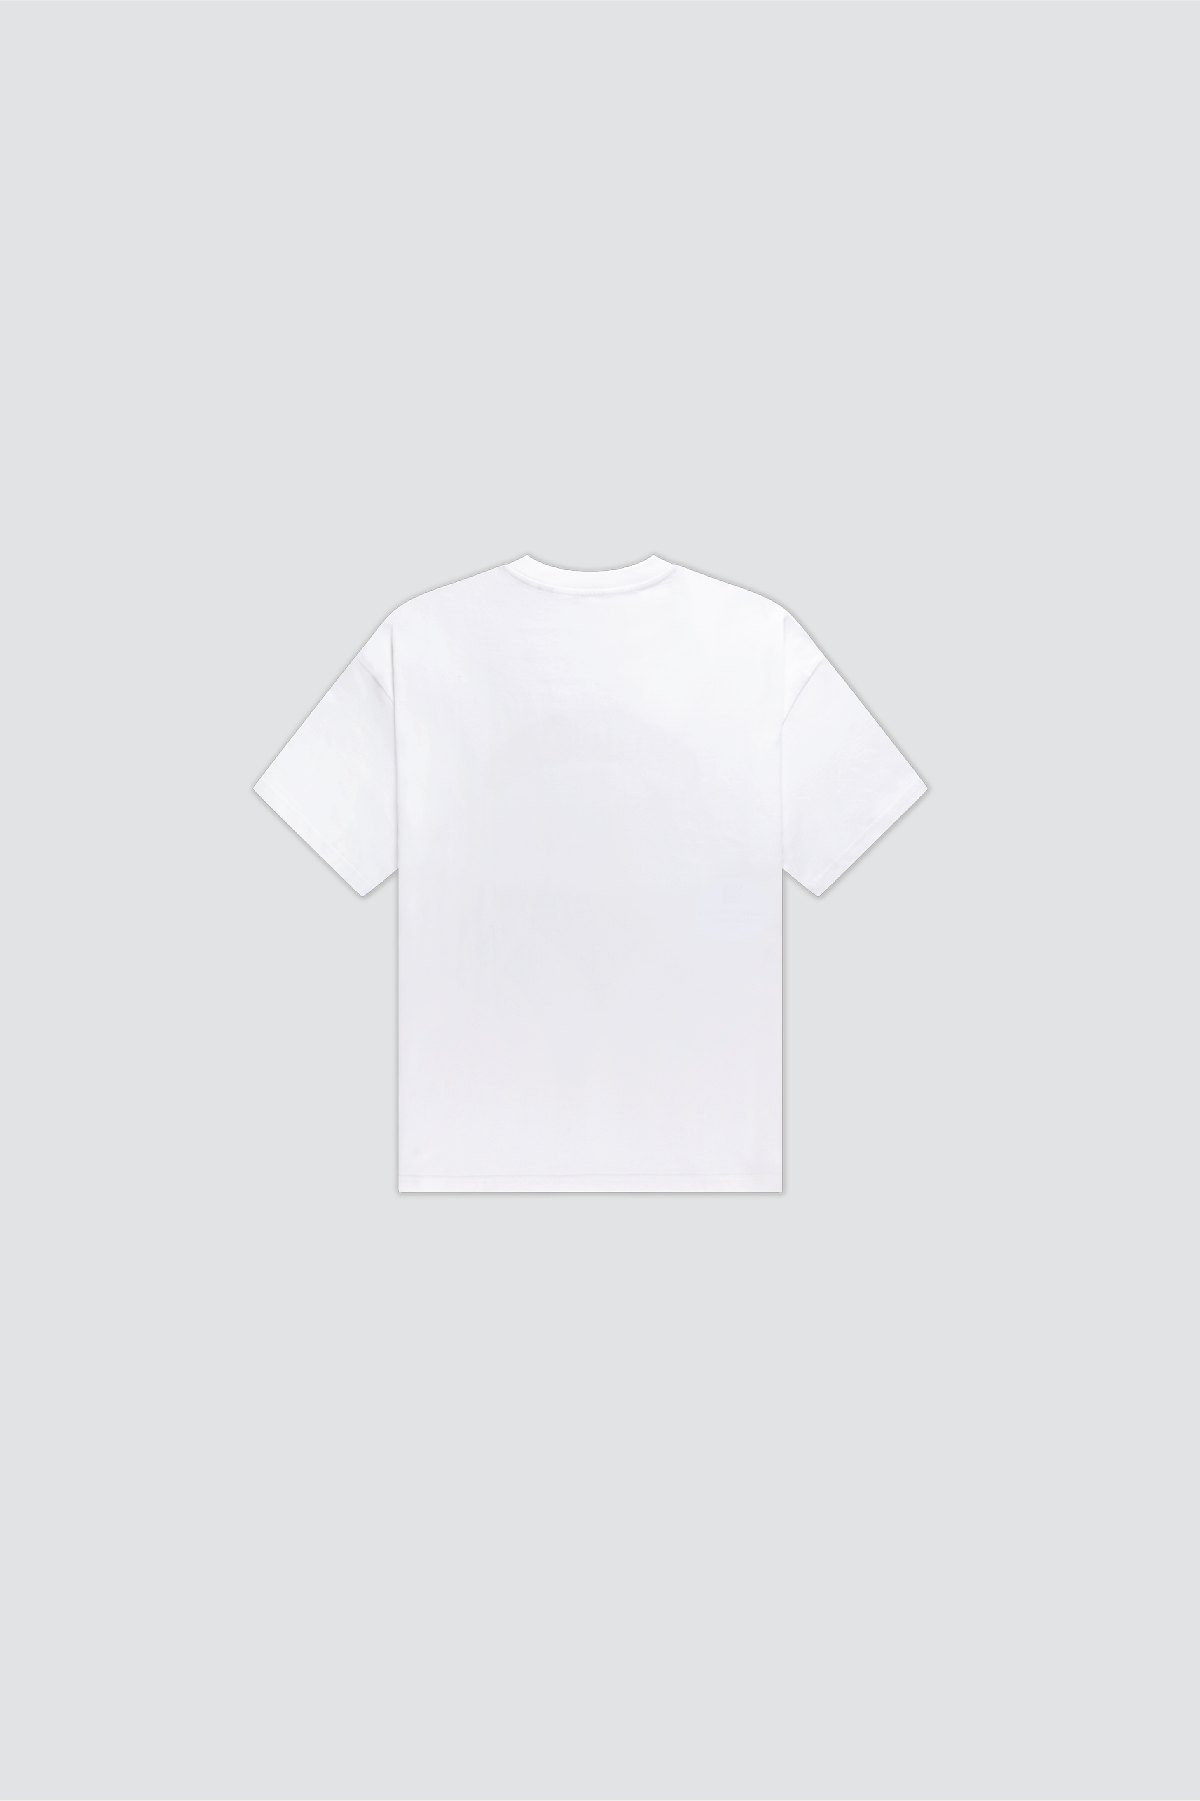 SECLUDED WHITE STORM TEE